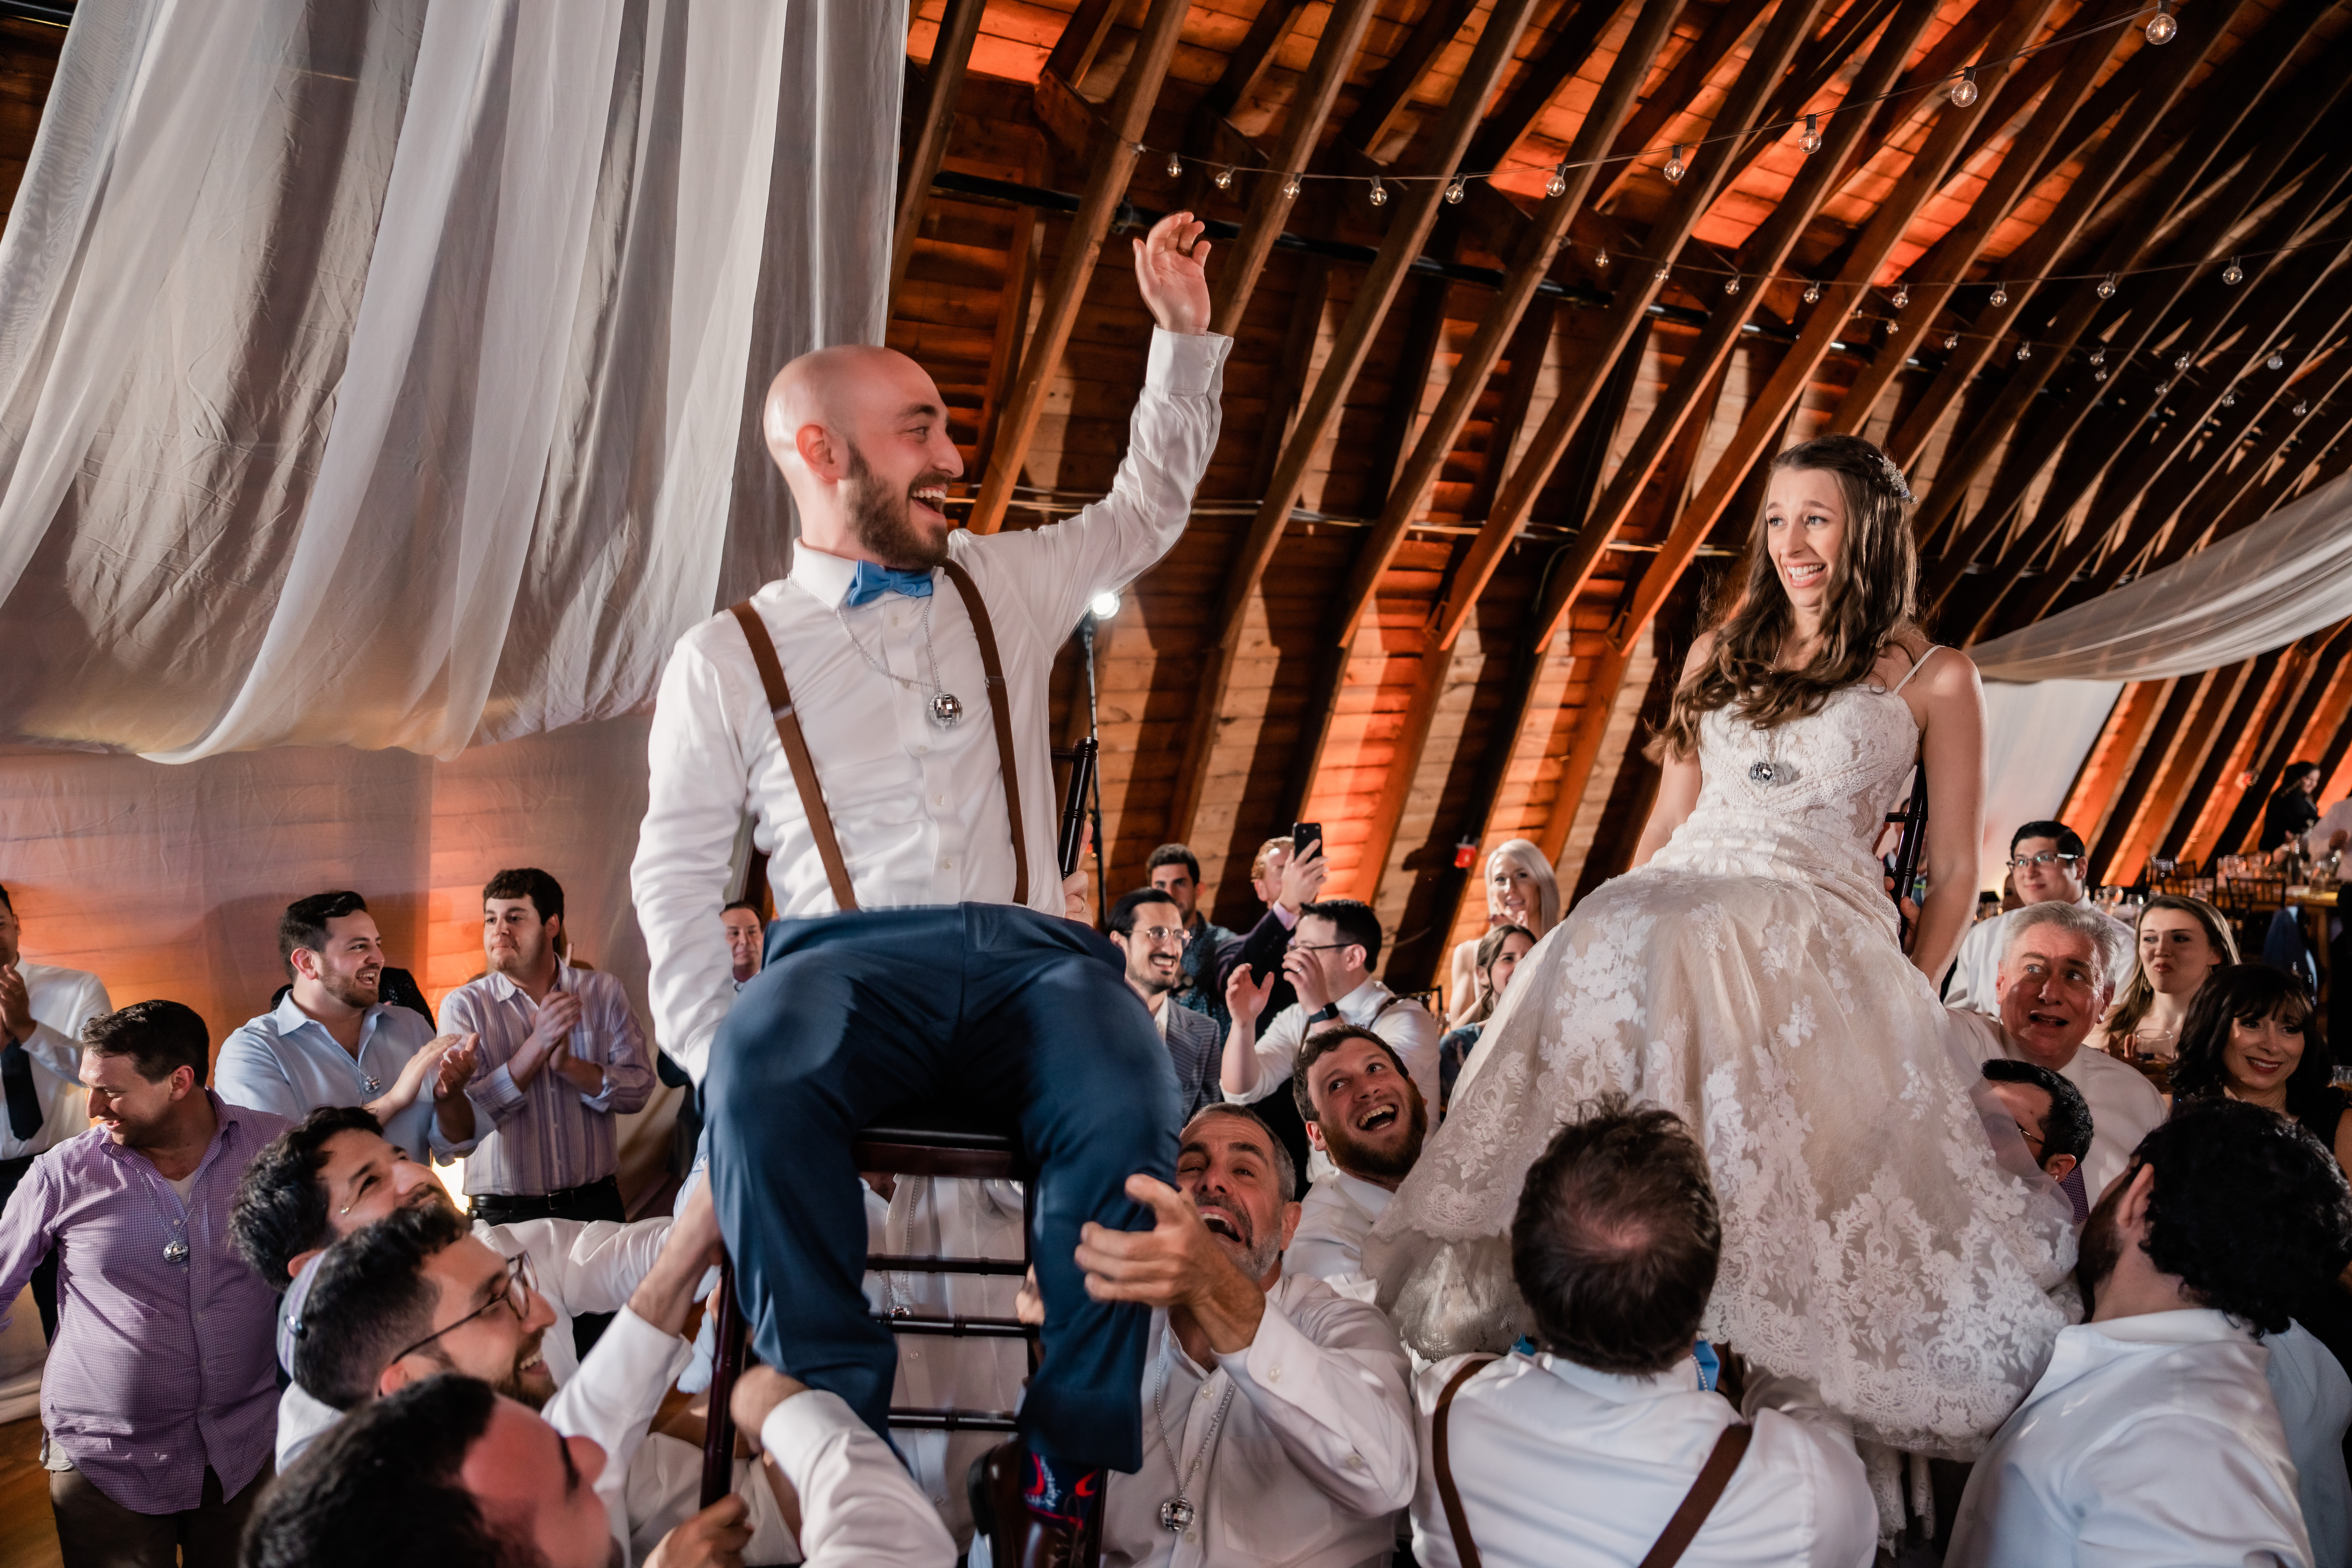 The Barn at Perona Farms, Perona Farms Wedding, New Jersey Wedding Photographer, Sussex County Wedding Photographer, NJ Wedding Photographer, Sussex County NJ Photographer, New Jersey Wedding Venues, Sussex County Wedding Venue, Wedding Inspiration, Wedding Planning, Wedding Ideas, Unique Wedding Photos, Wedding Photo Ideas, Boho Wedding, Farm Wedding, Bride and groom being carried up in chairs by guests during the reception